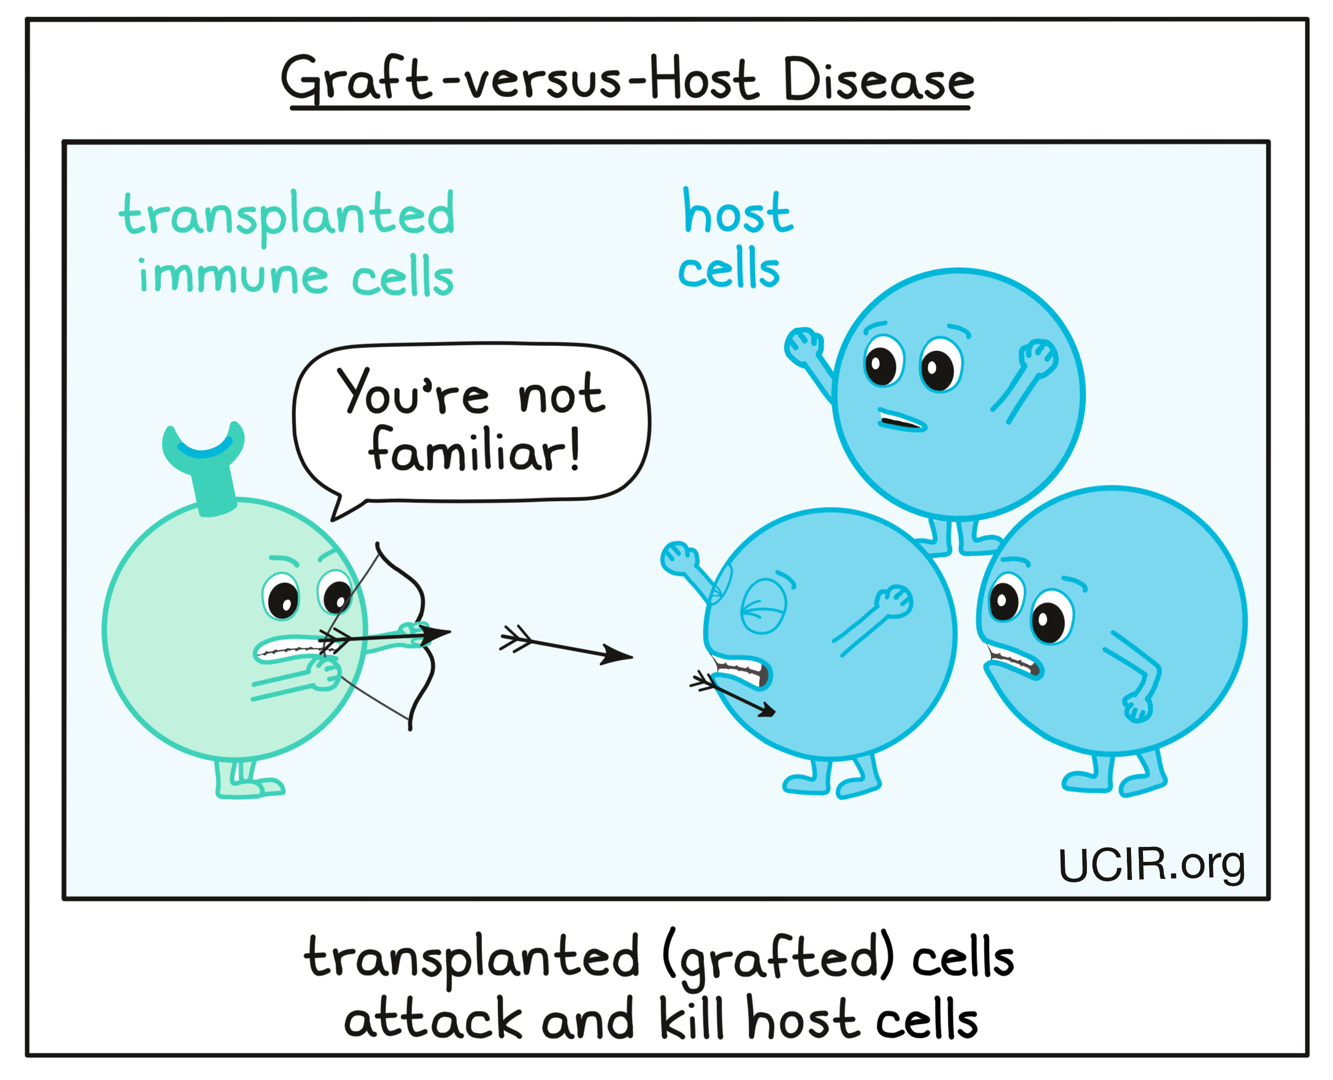 Illustration showing grafted cells attacking and killing host cells